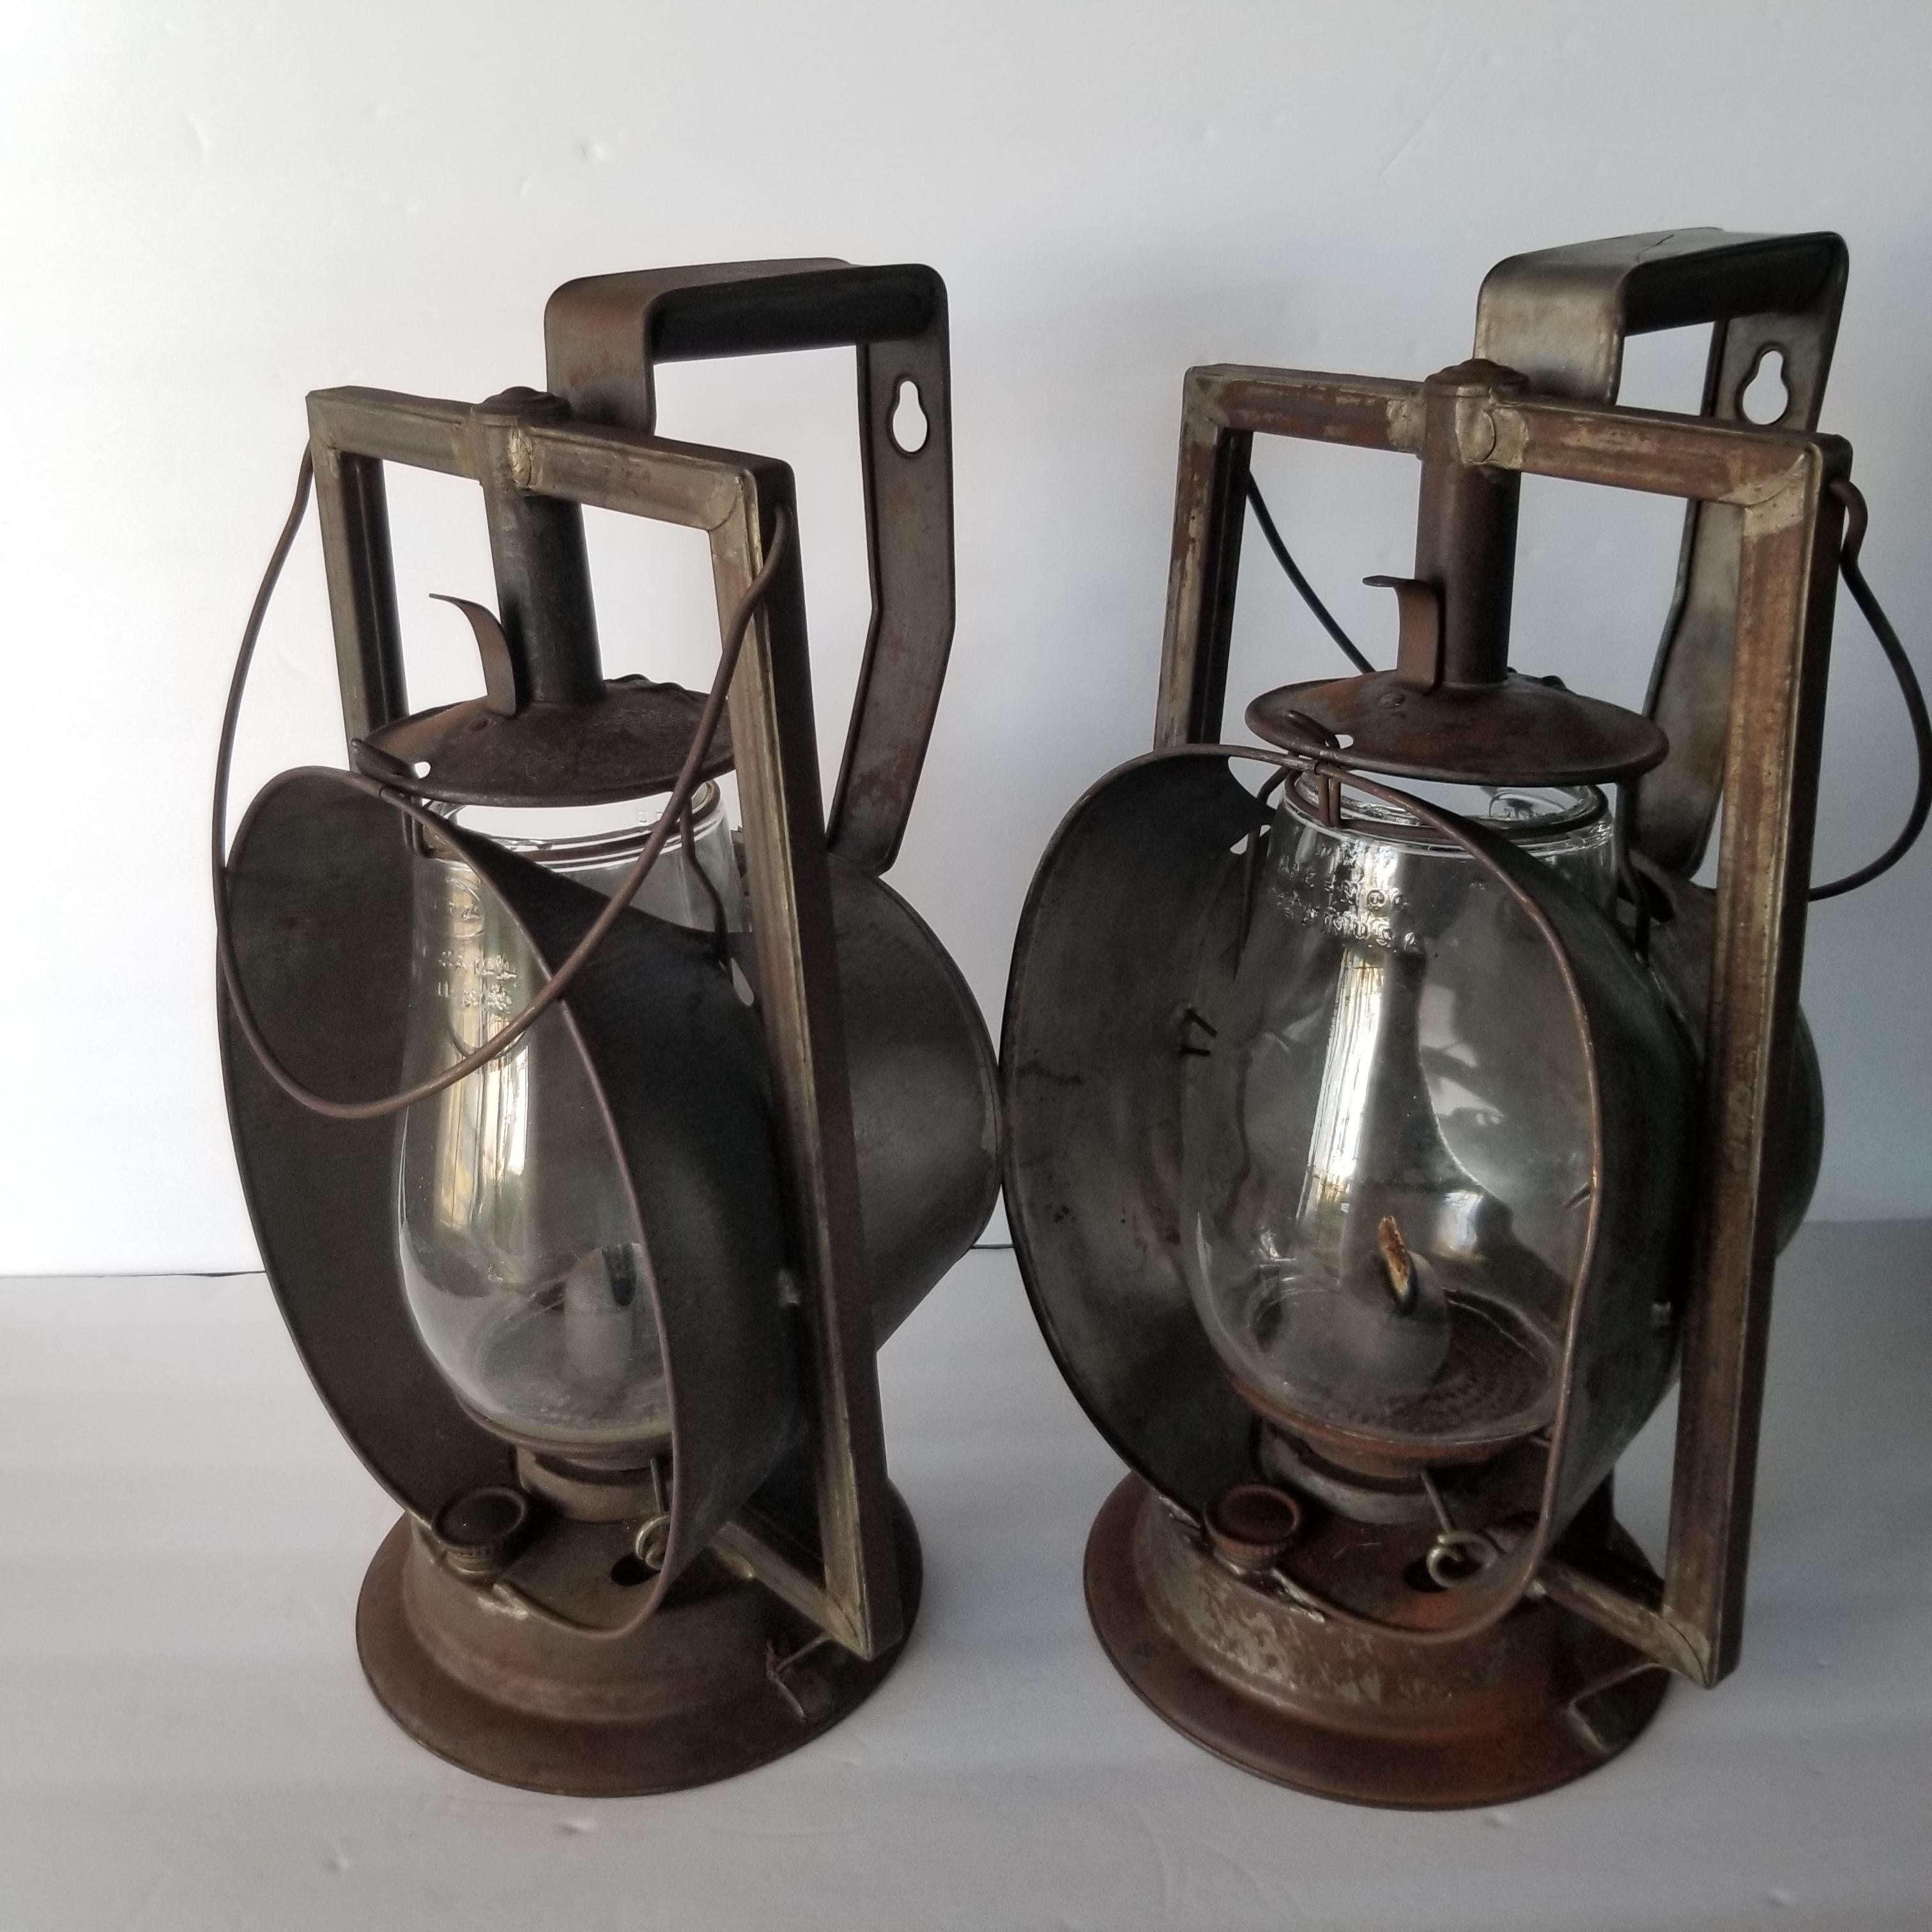 Antique Dietz Acme Large Inspector Lamp Two Railroad Lanterns New York 1900s 1